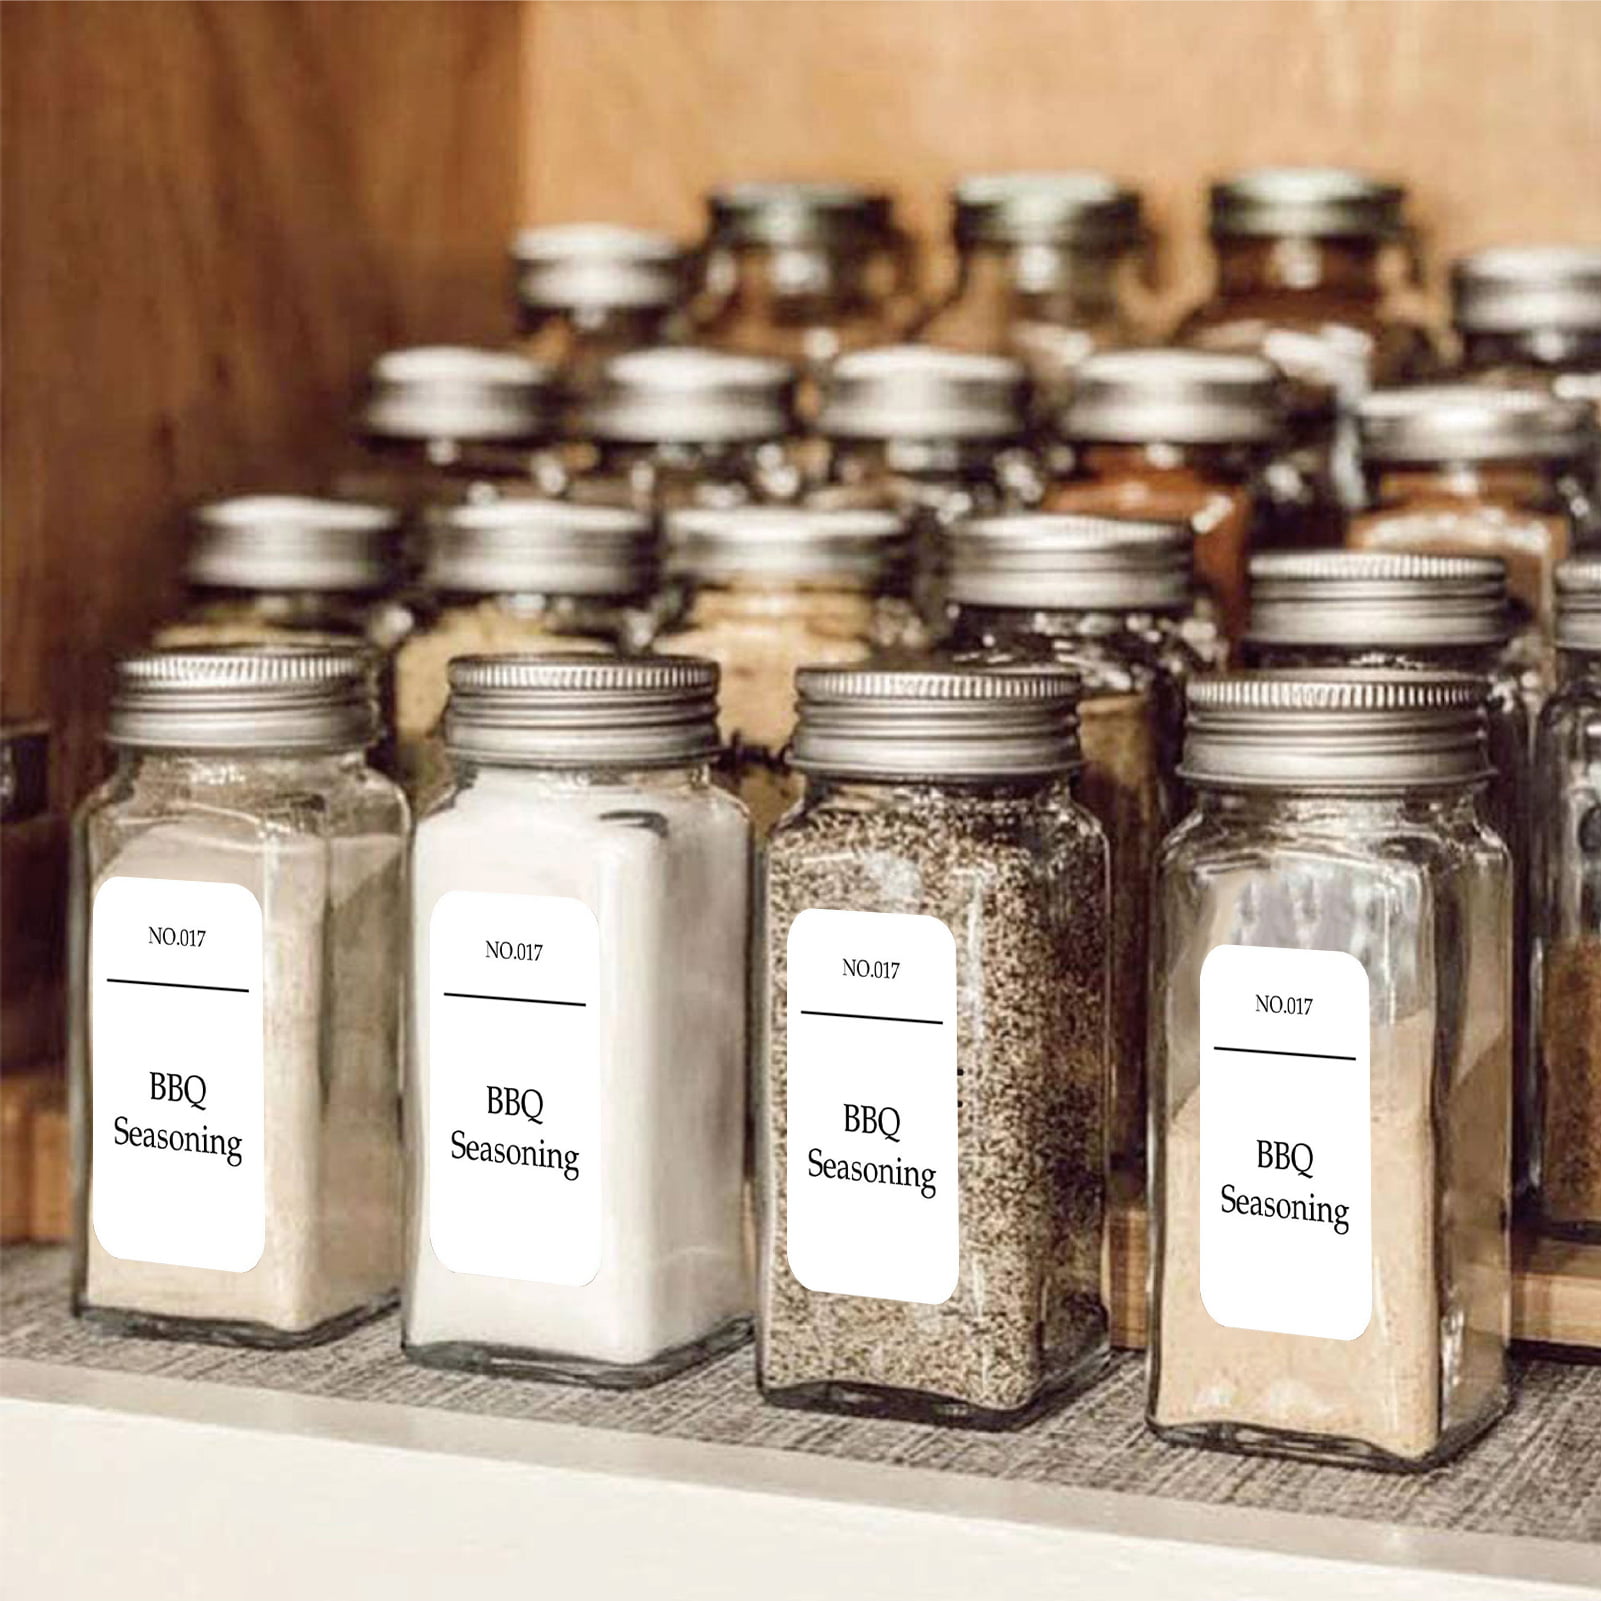 216 Clear Spice Jar Name Labels — 1 Wide Rectangle Text – Gneiss Spice